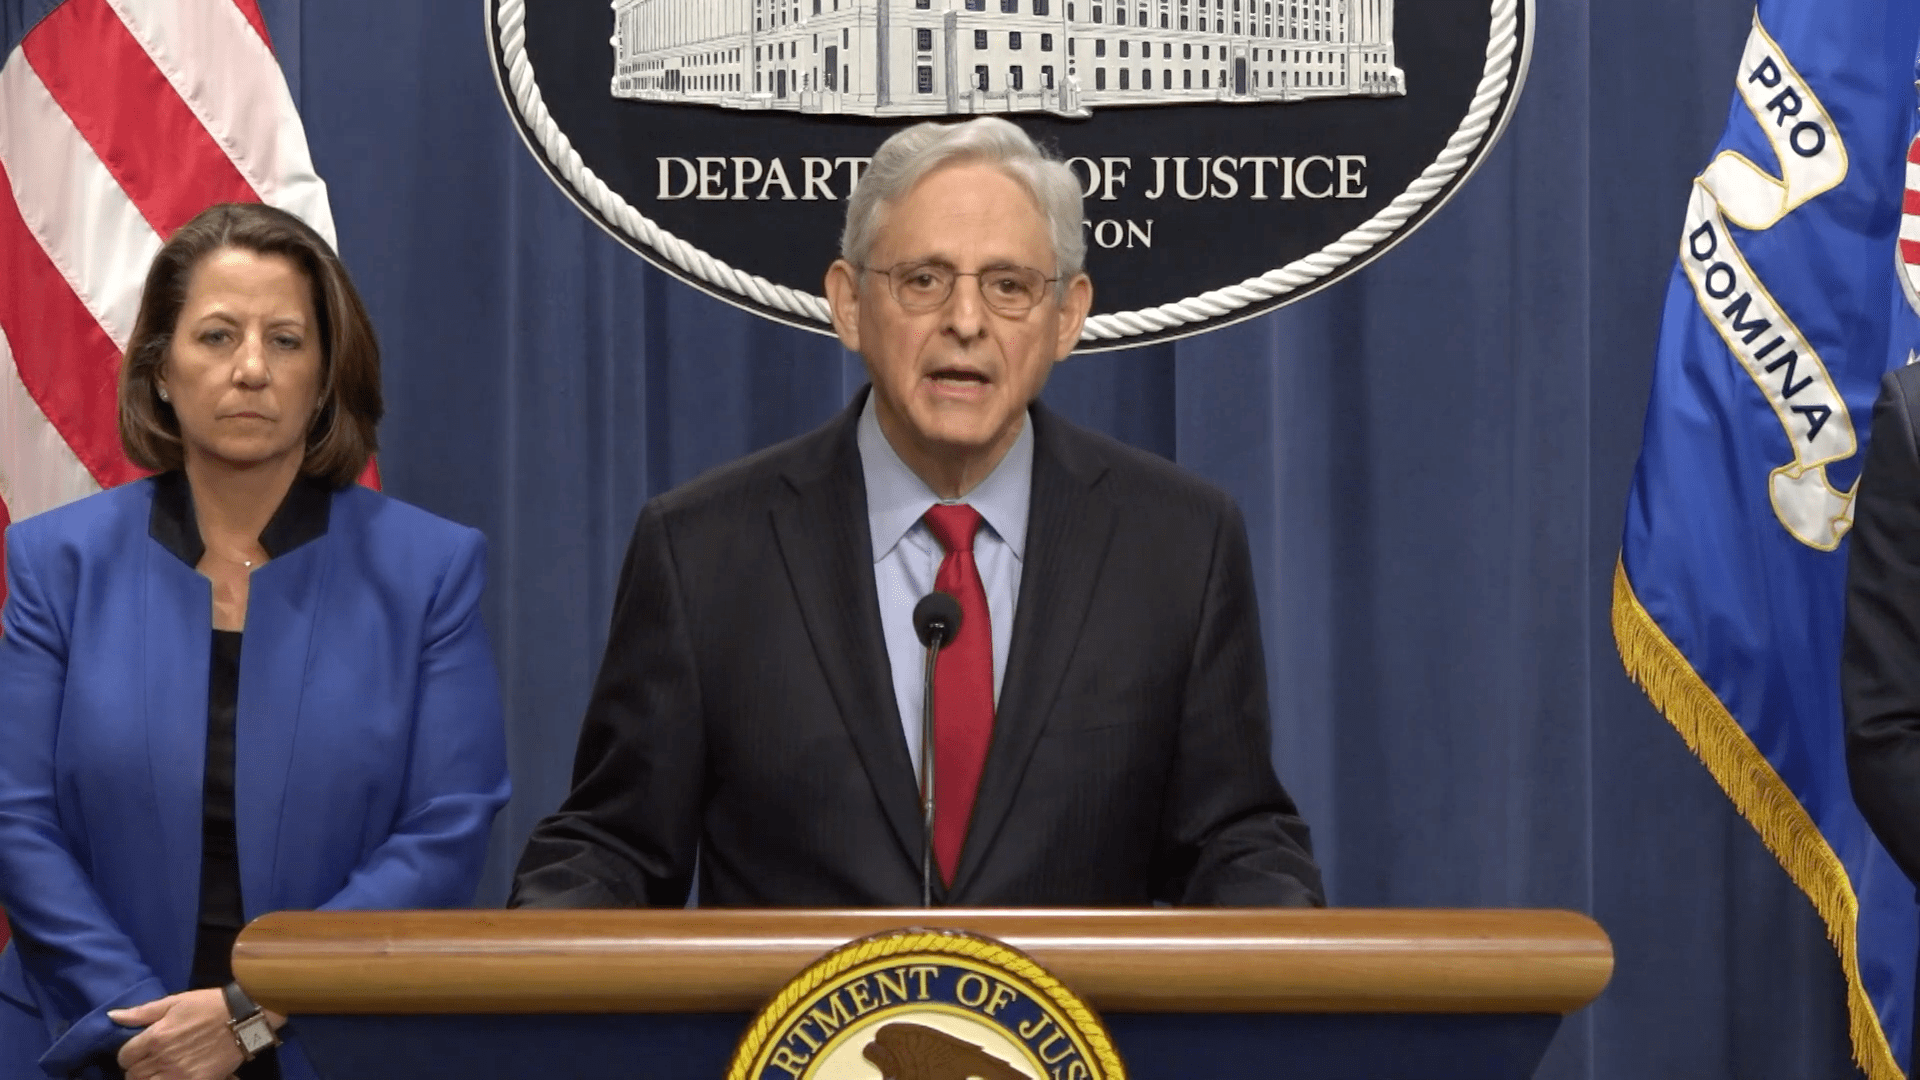 Merrick Garland: "There's a law for that." Source: U.S. Dept. of Justice.